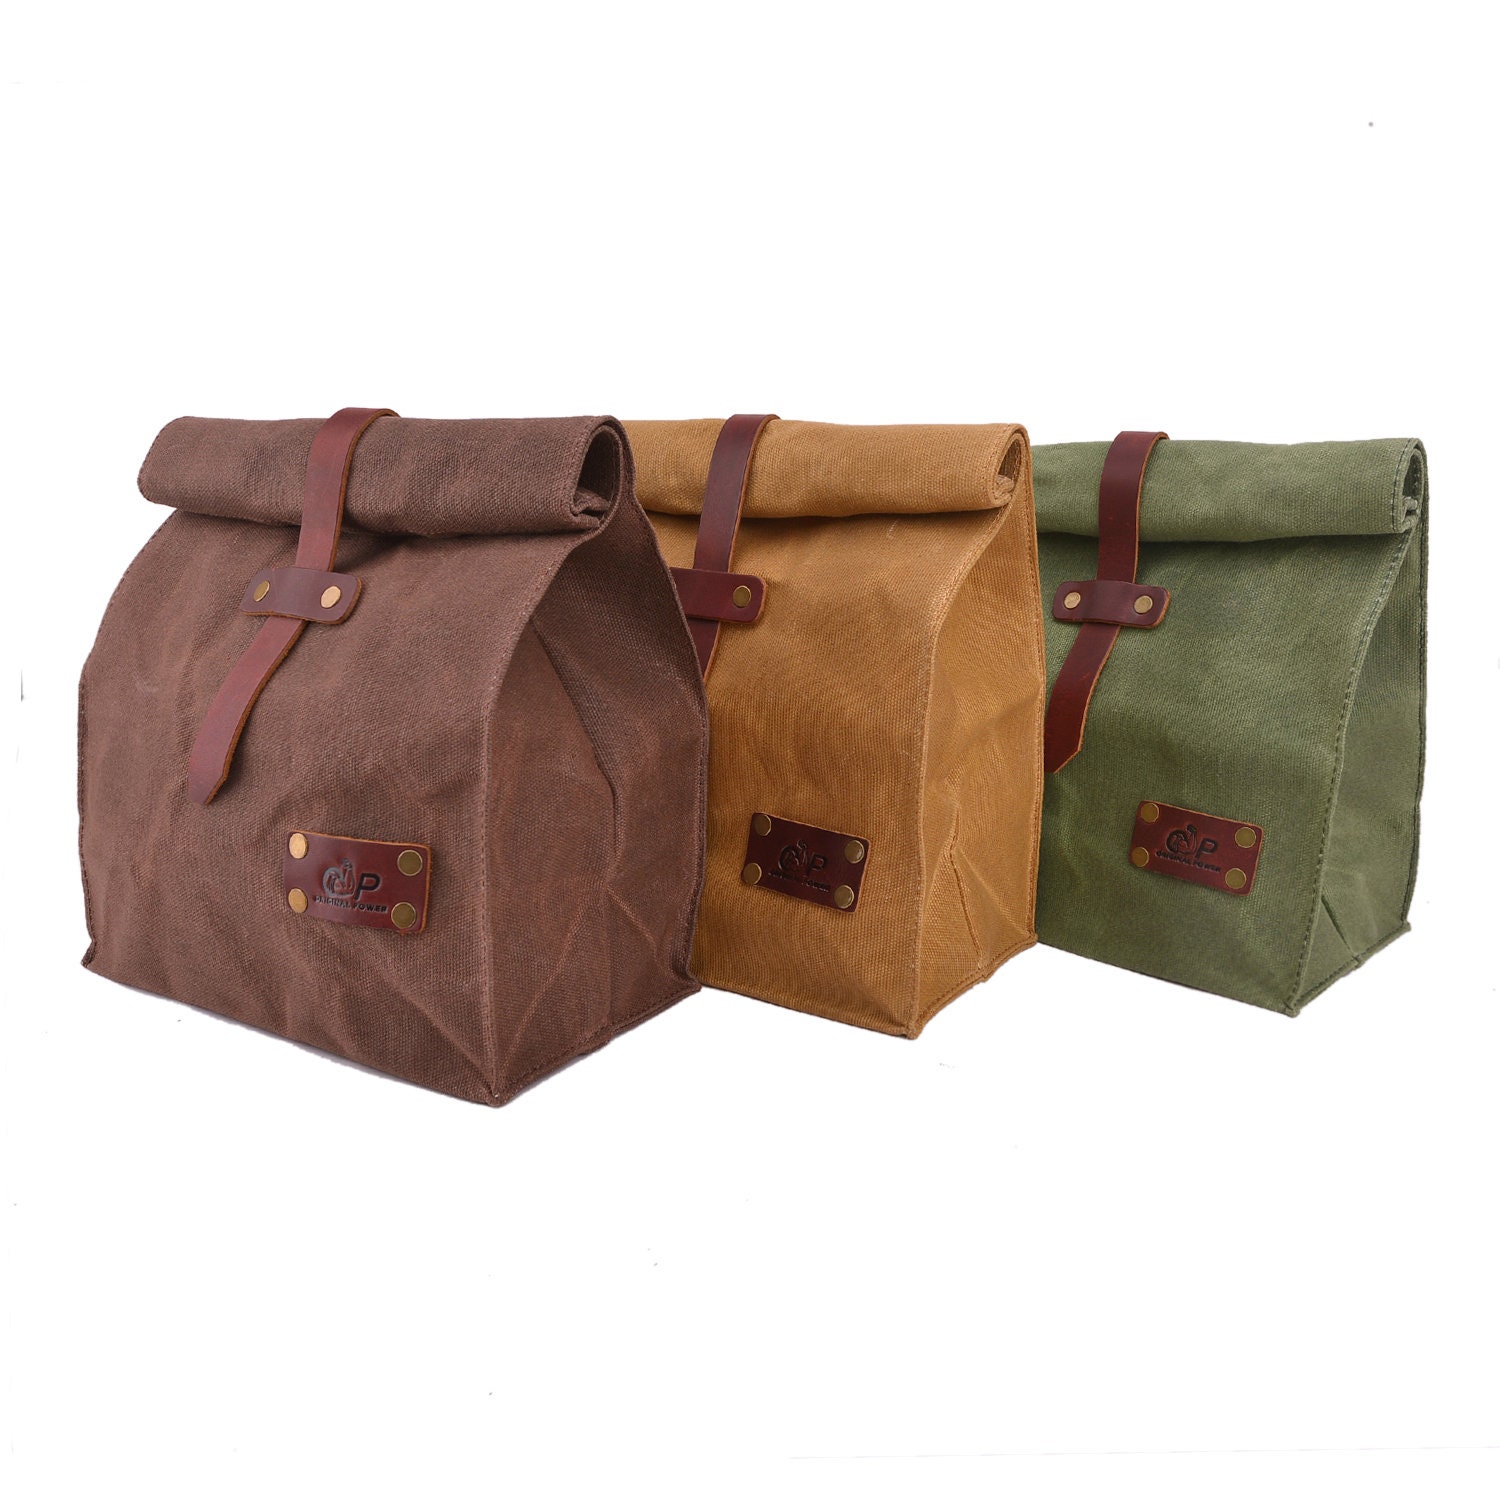 REPRESENT: Mud Bowling-bag in tech eco-leather and suede